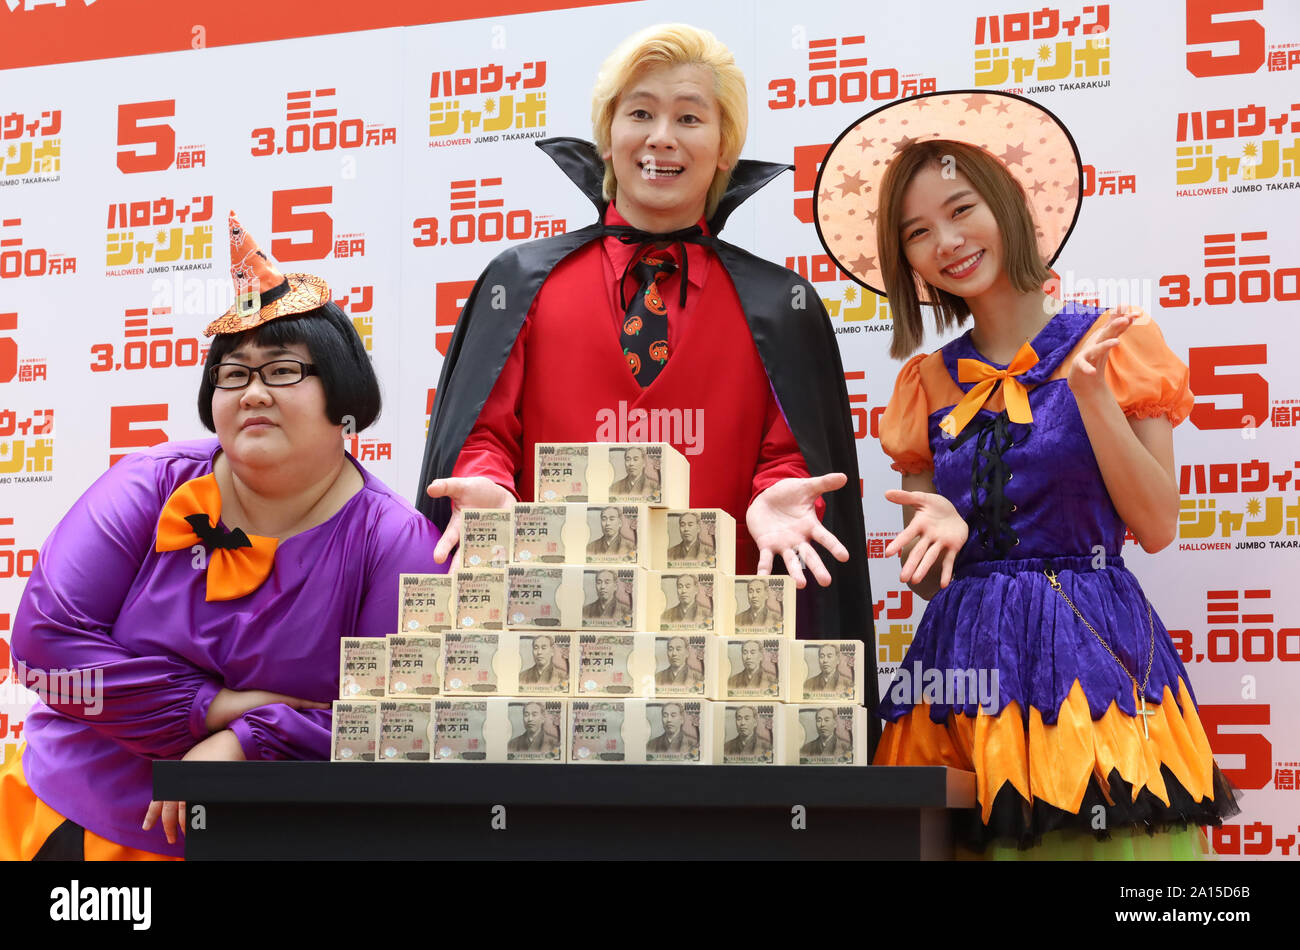 Tokyo, Japan. 24th Sep, 2019. Japanese TV personality Nao Asahi (R) and  comedy duo Maple Superalloy members Kazlaser (C) with Natsu Ando (L) in  costumes attend a promotional event of the 500